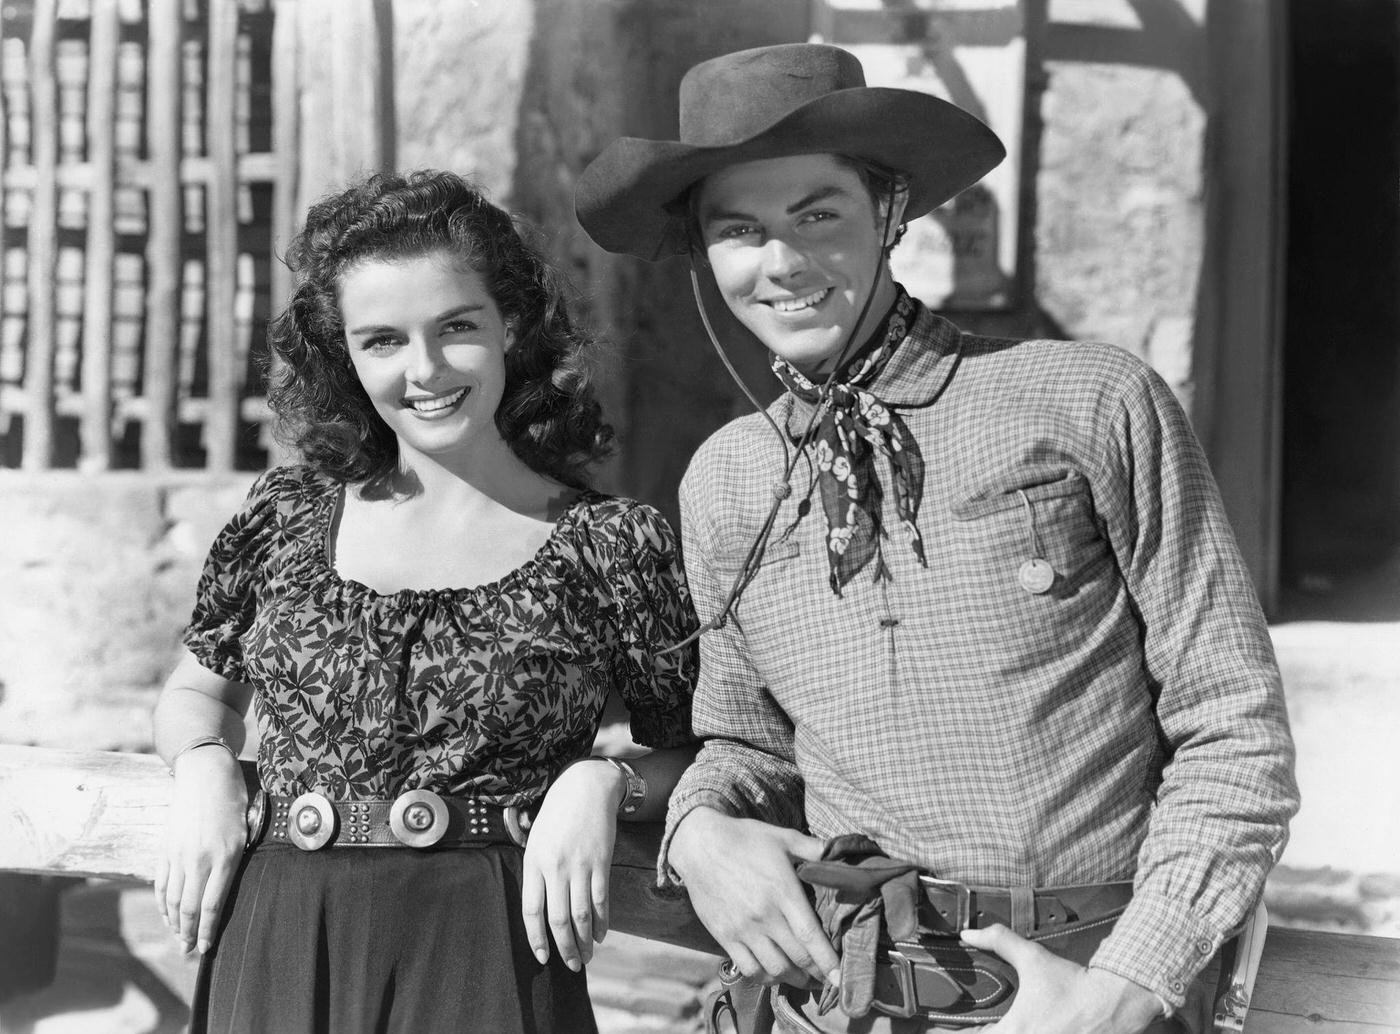 Jane Russell and Jack Buetel on the set of The Outlaw, 1943